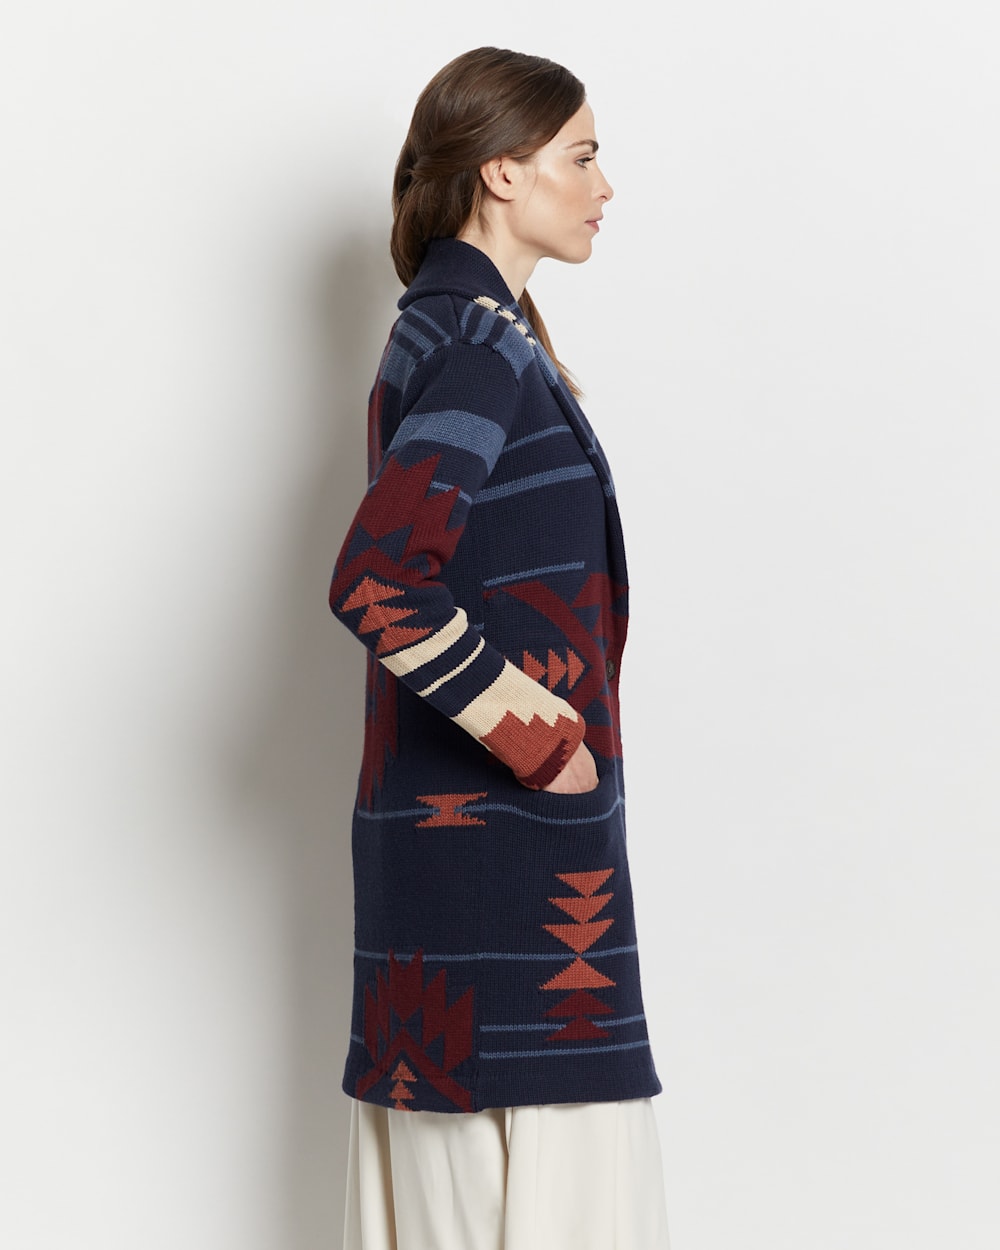 ALTERNATE VIEW OF WOMEN'S GRAPHIC SWEATER COAT IN NAVY/MAROON MULTI image number 5